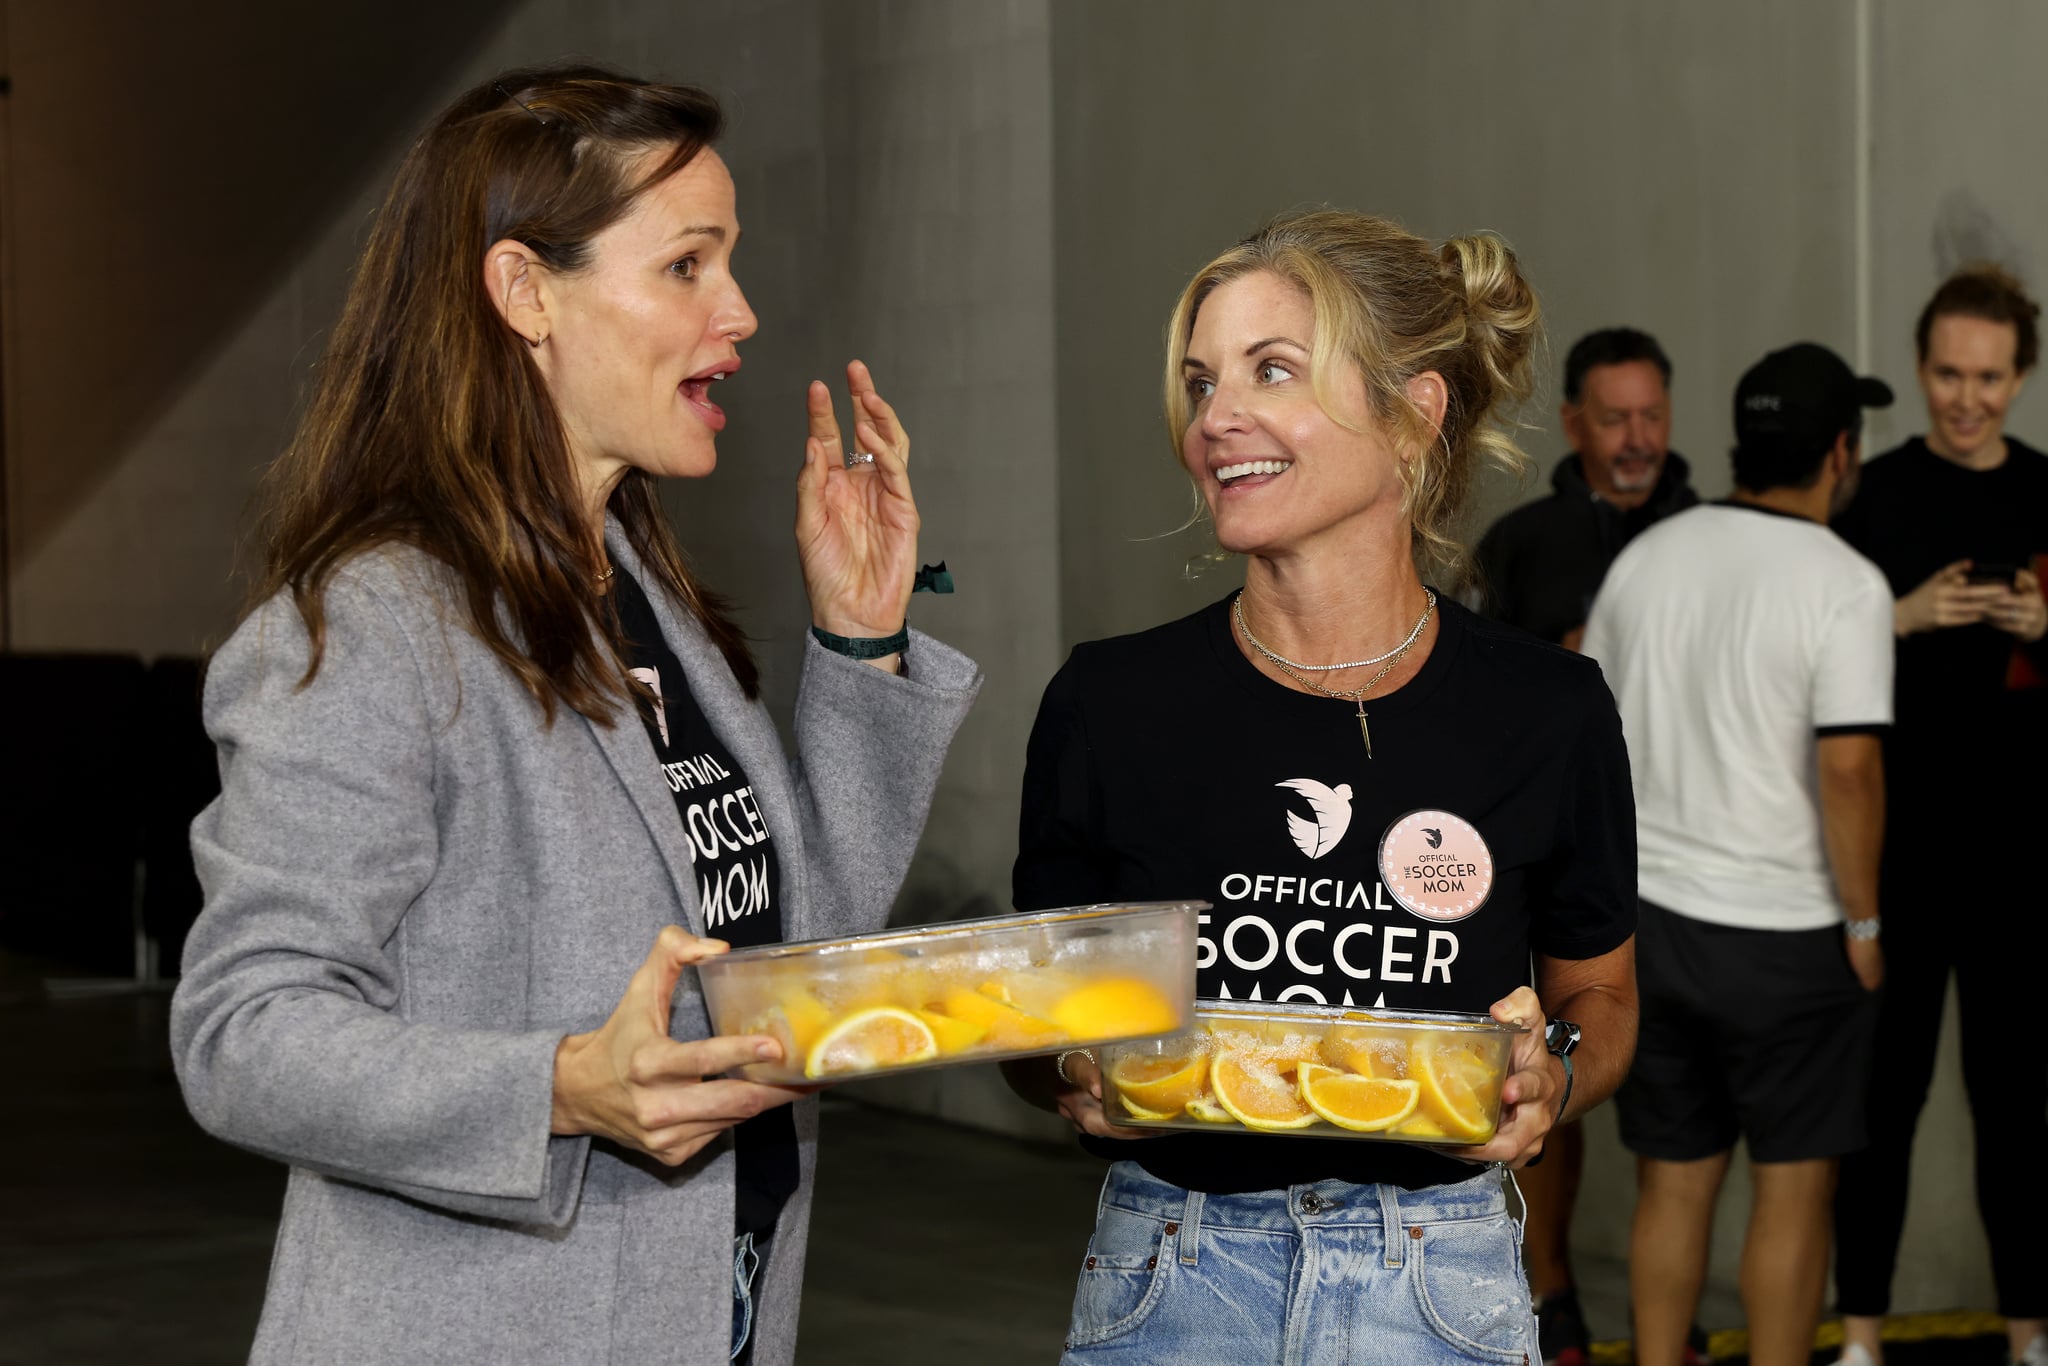 LOS ANGELES, CALIFORNIA - JULY 09: Angel City FC Investors Jennifer Garner and Glennon Doyle look on after the game against San Diego Wave FC at Banc of California Stadium on July 09, 2022 in Los Angeles, California. (Photo by Katelyn Mulcahy/Getty Images for Angel City FC)